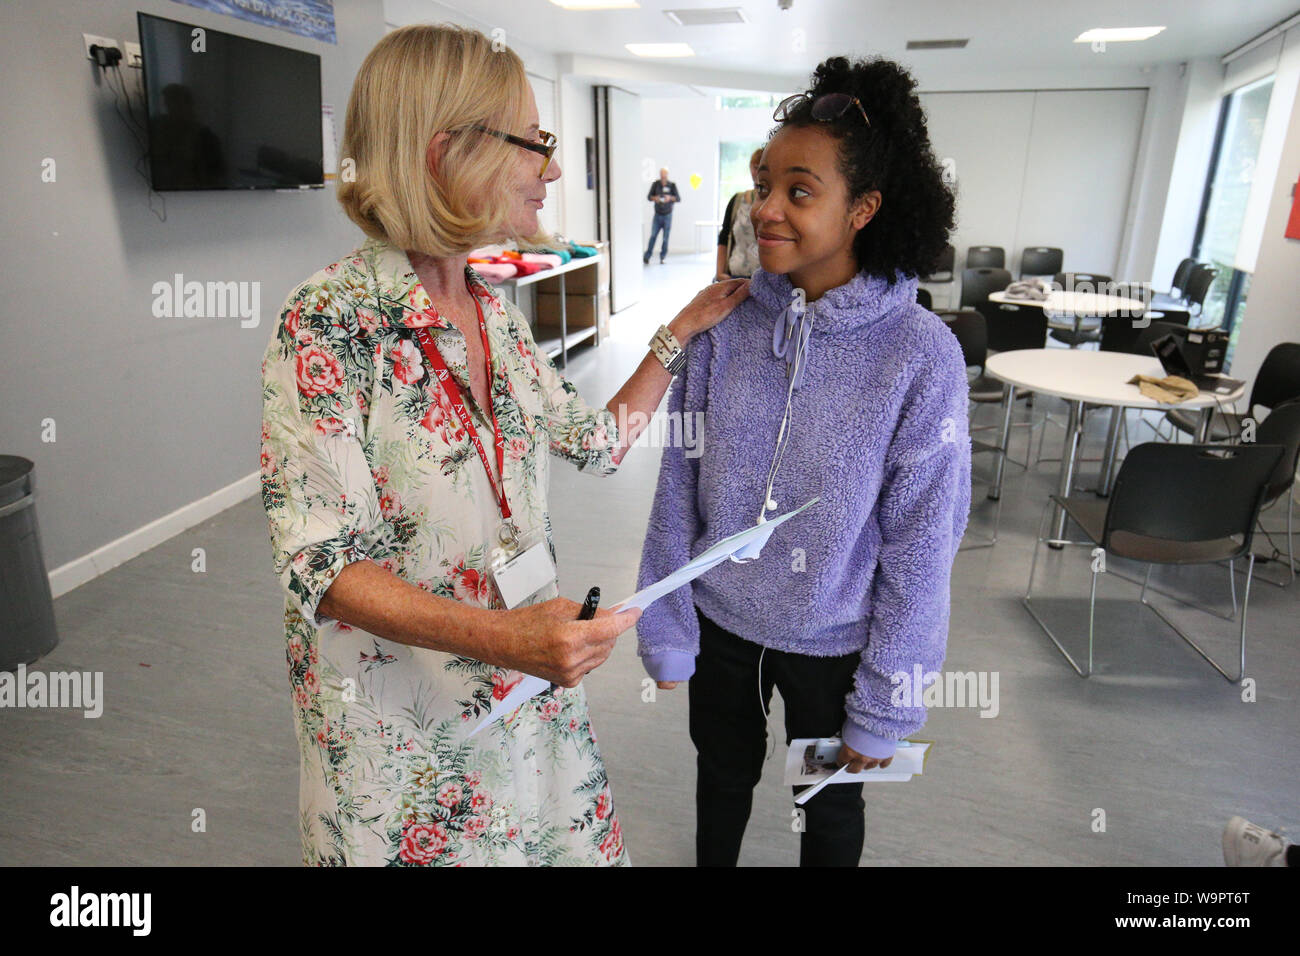 Bruna Miguel (right), whose A Level results have qualified her for a place at the London School of Economics, is congratulated by school principal Delia Smith at the Ark Academy in Wembley, London. Stock Photo